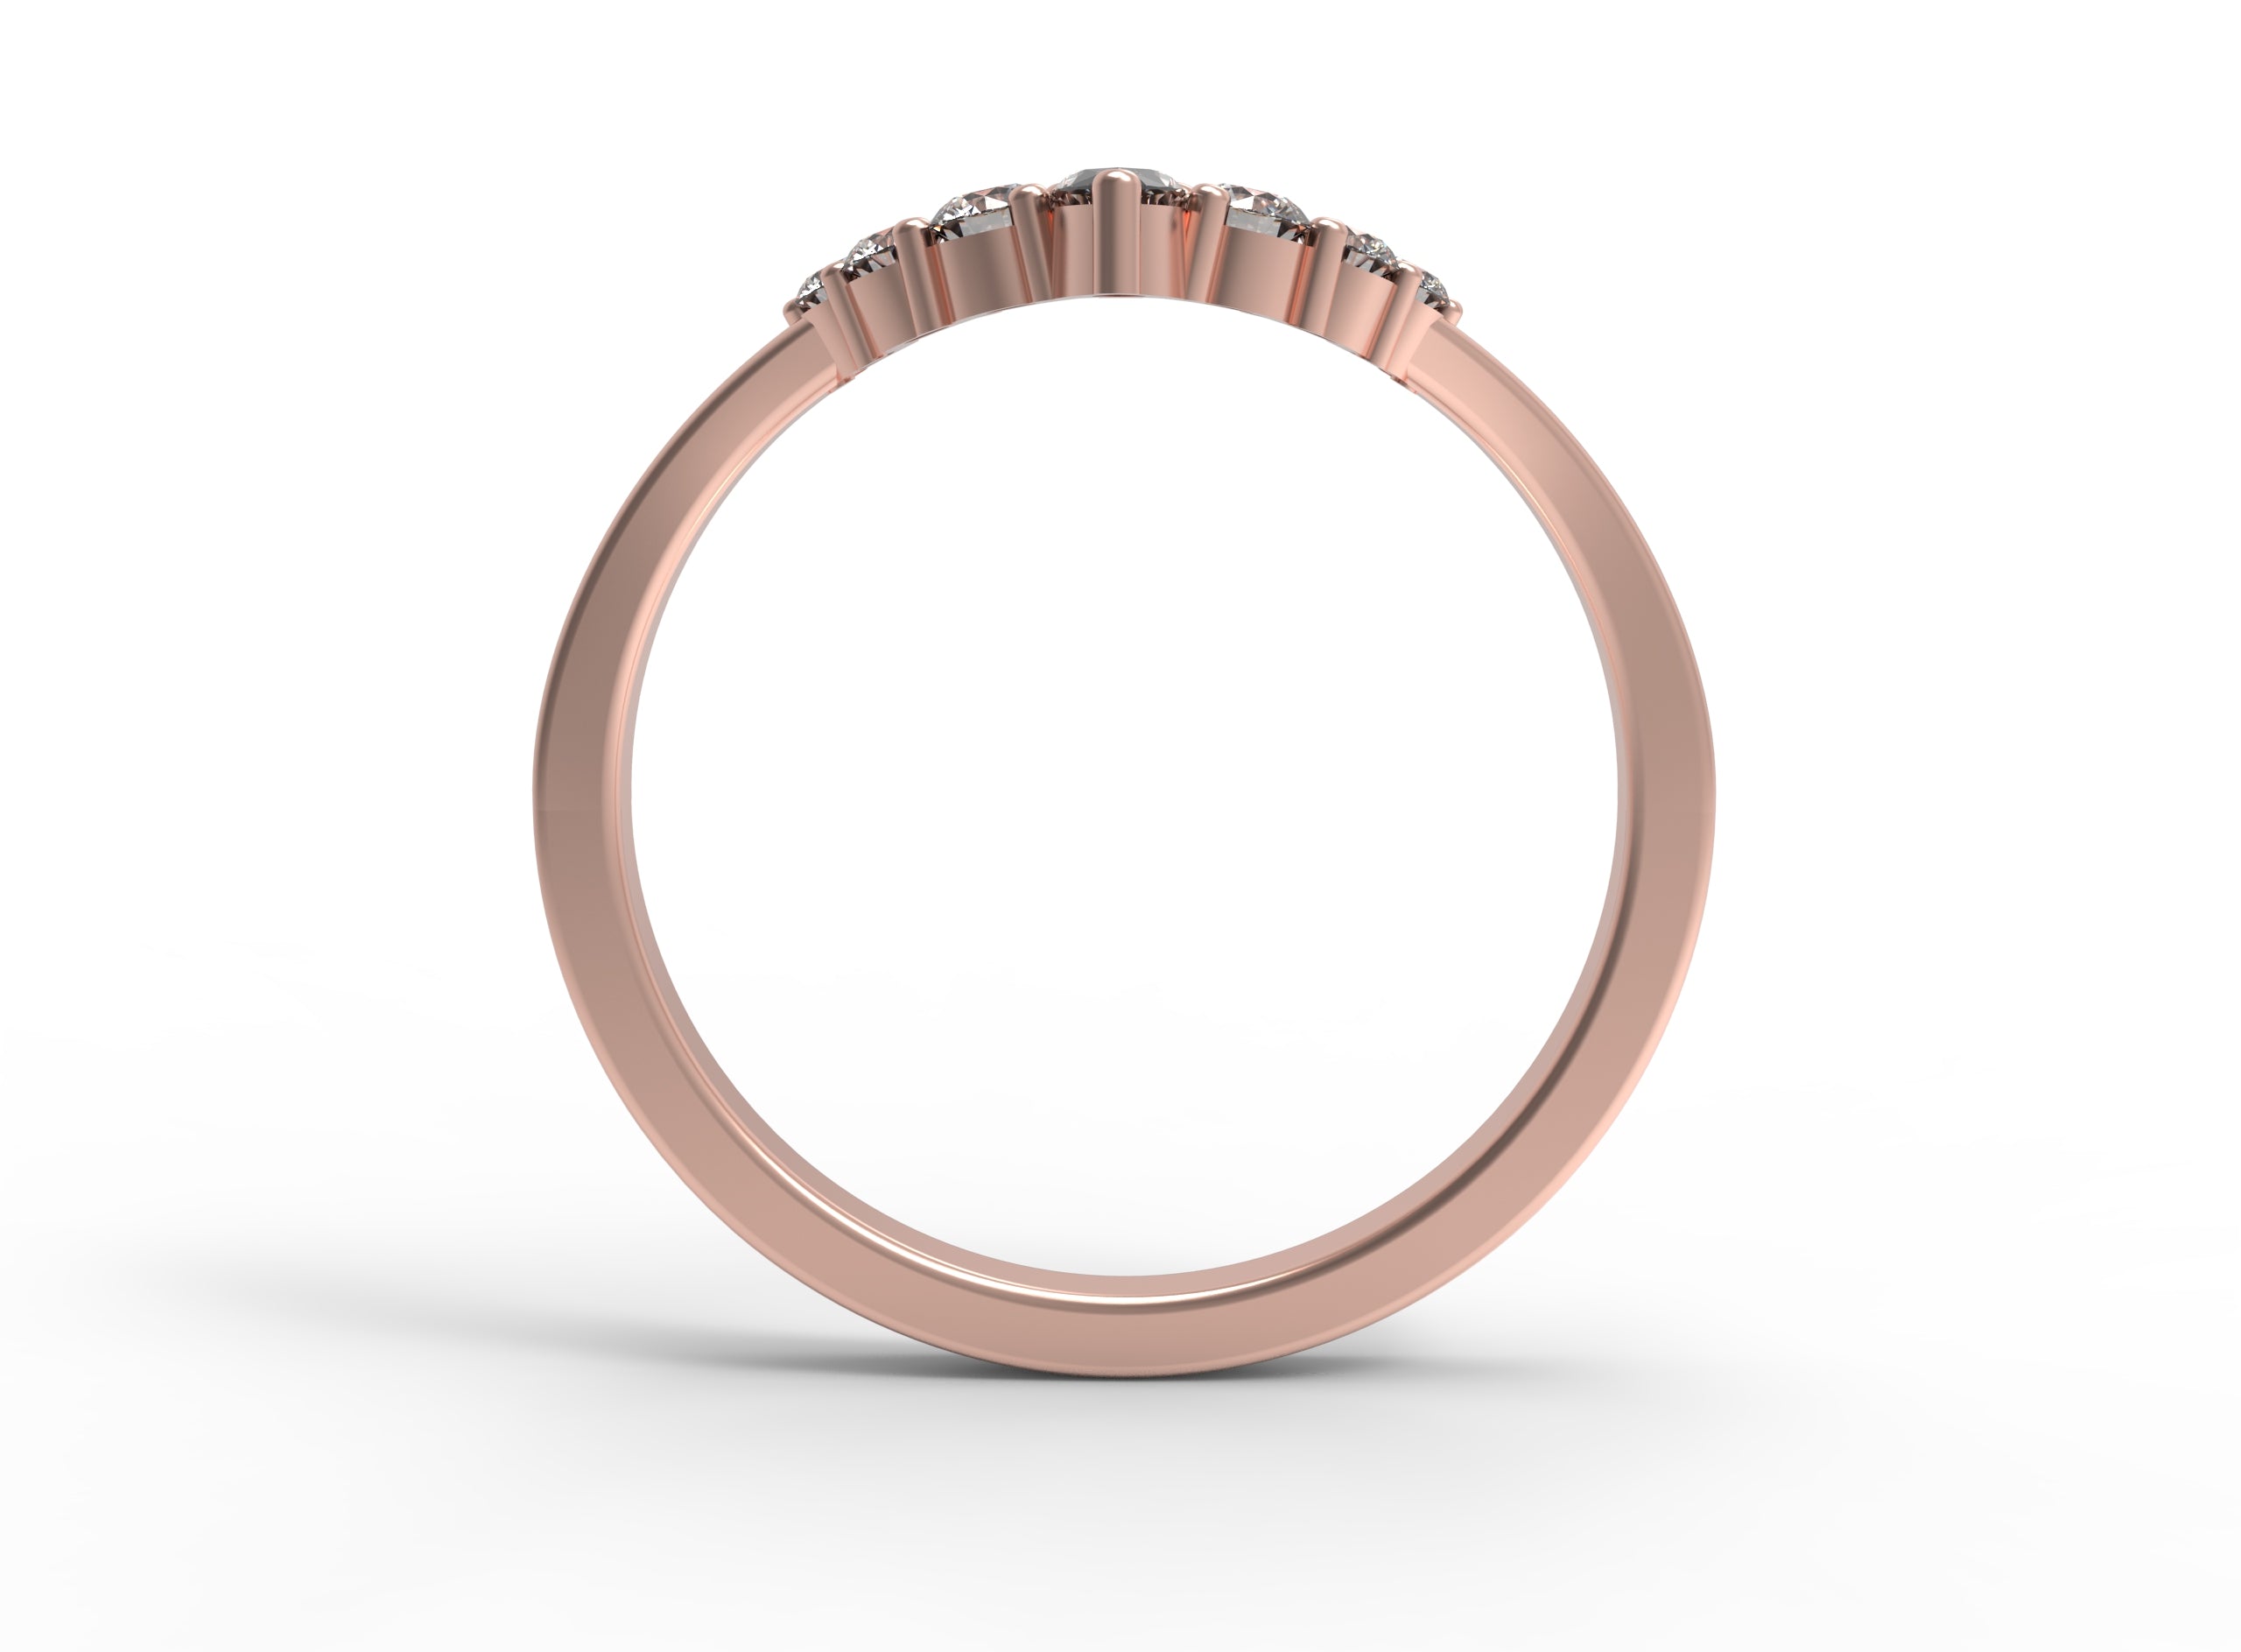 Close up of the Chevron Penelope womens wedding band by Fluid Jewellery in rose gold  3